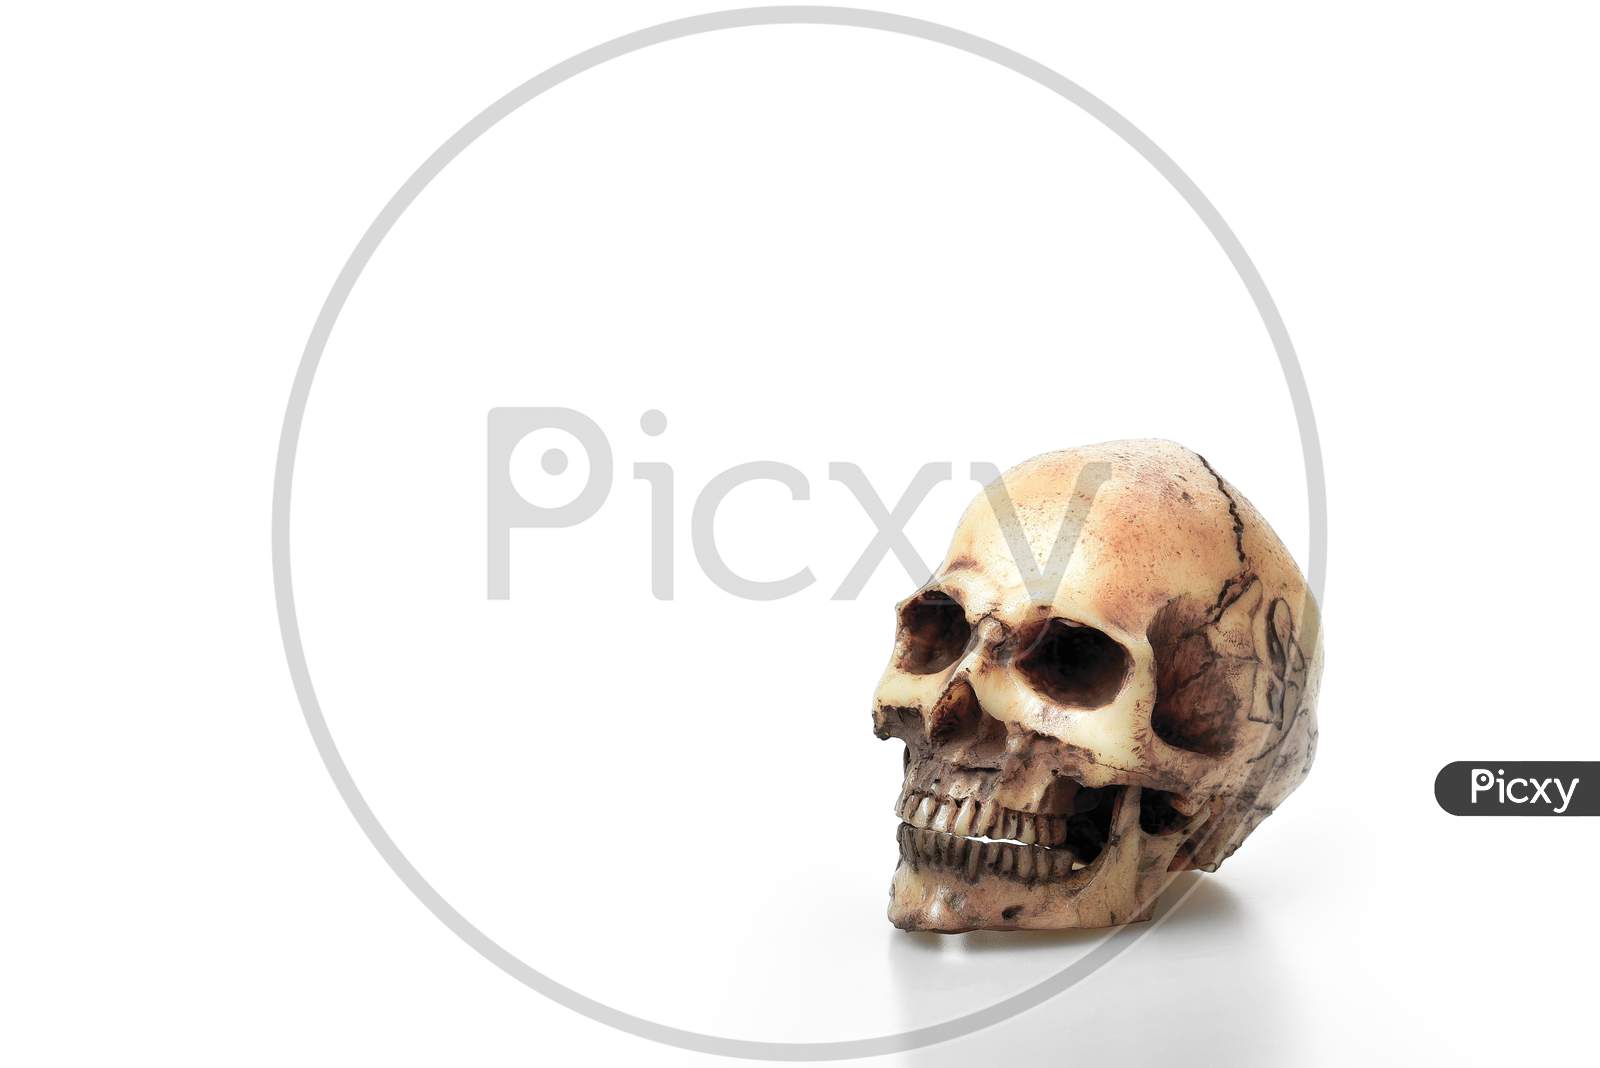 Cracked Skeleton Head Bone Or Skull On The White Background And Copy Space For Text, Deadman Concept, Dangerous Concept, Education For Anatomy Science Subject In School